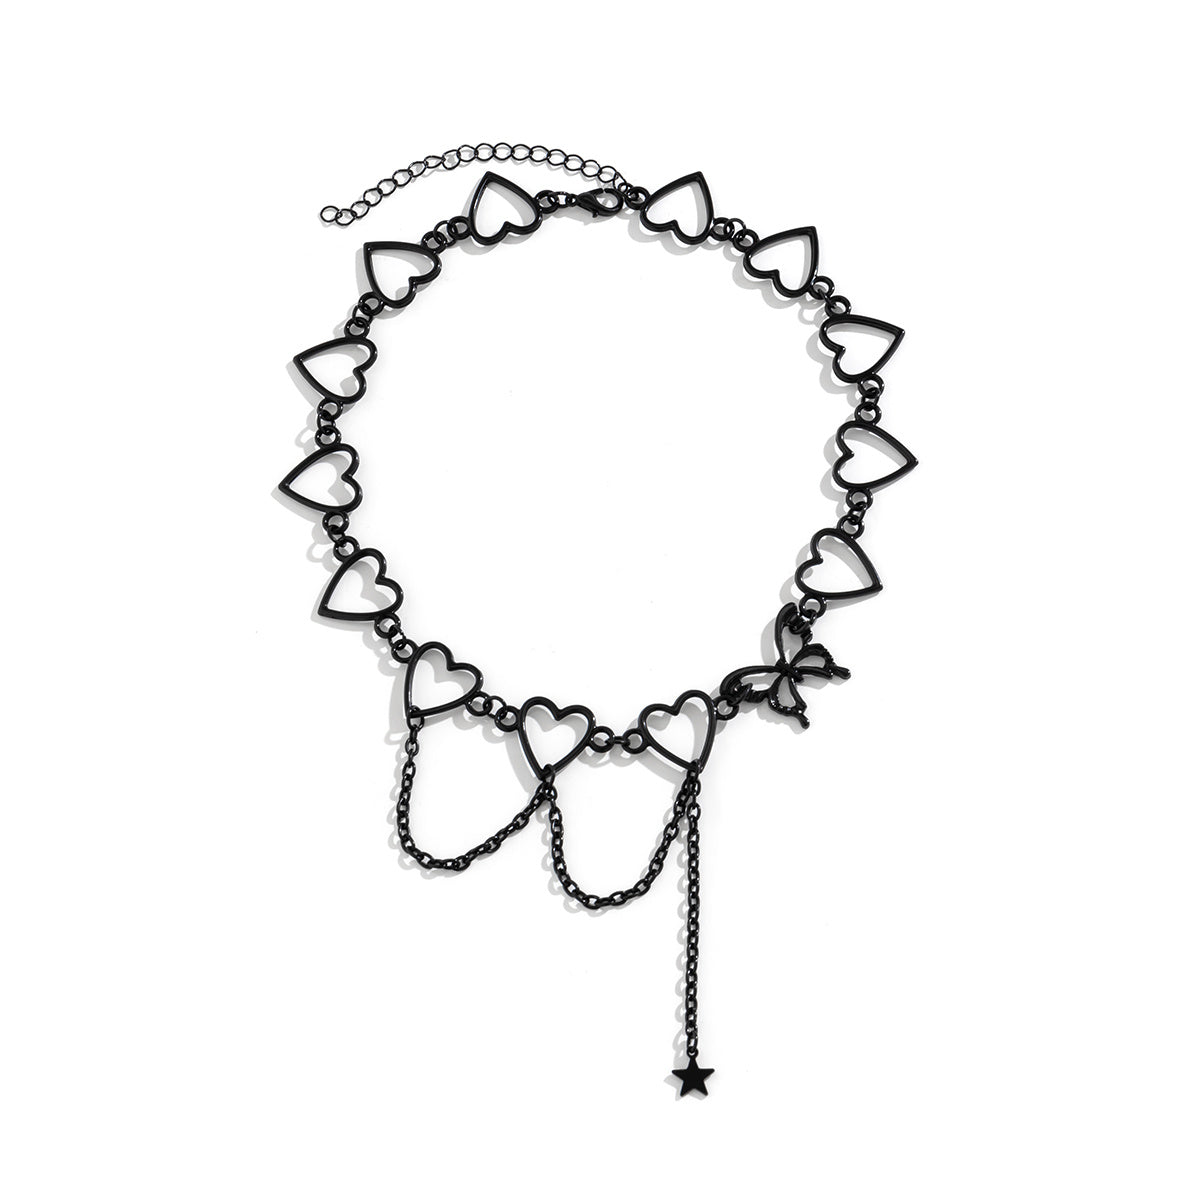 Punk Style Hollow Heart Choker Necklace With Star Shape Pendant Hollow Chain Tassel Adjustable Neck Jewelry Decoration For Women & Girls Party Clothings Accessories